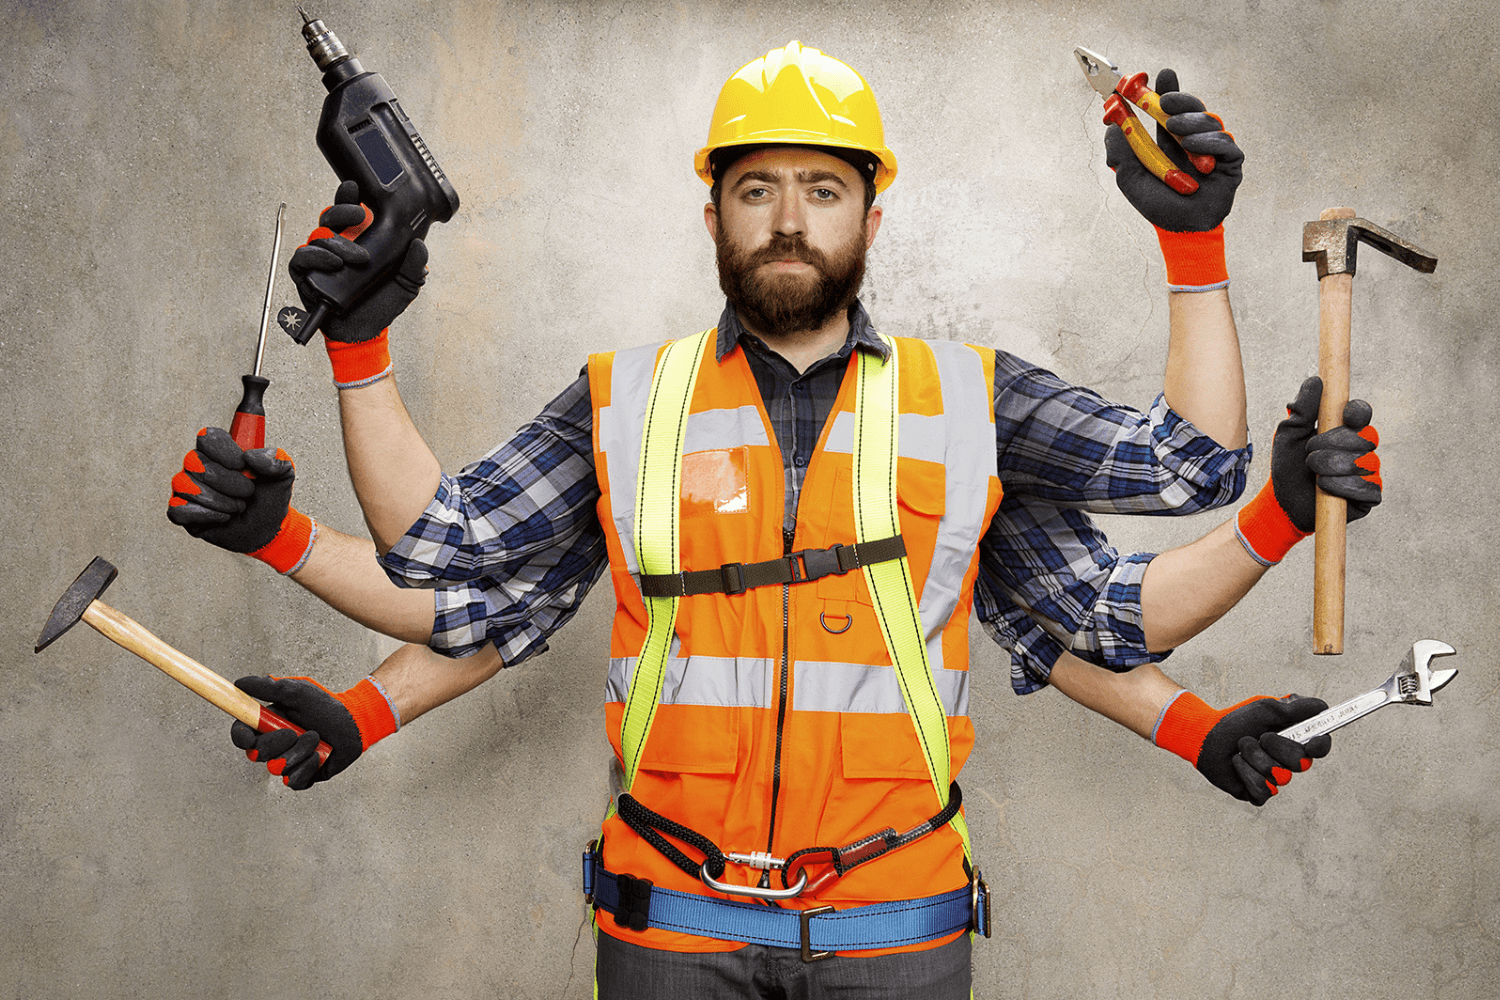 The Best On-Demand Handyman Apps to Boost Your Business: Our Top Picks for 2023